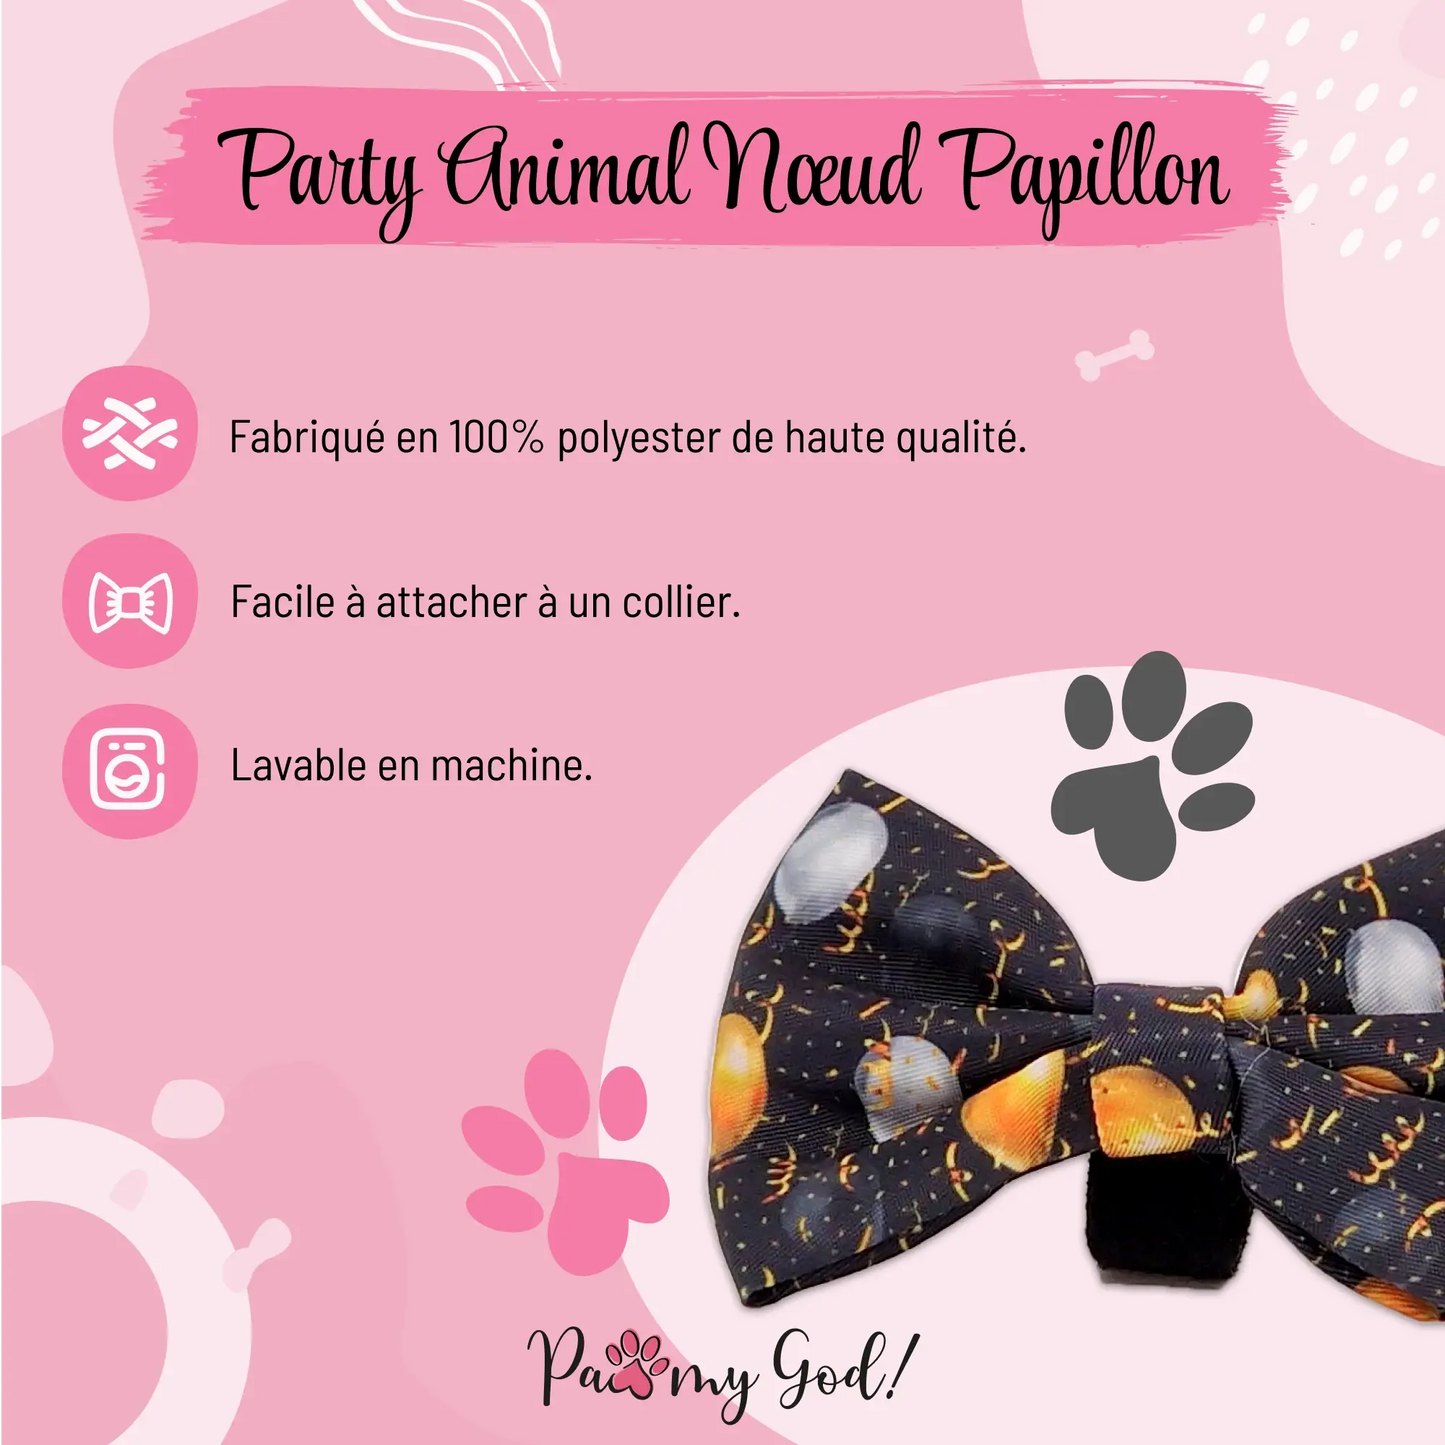 Party Animal Bow Tie Features